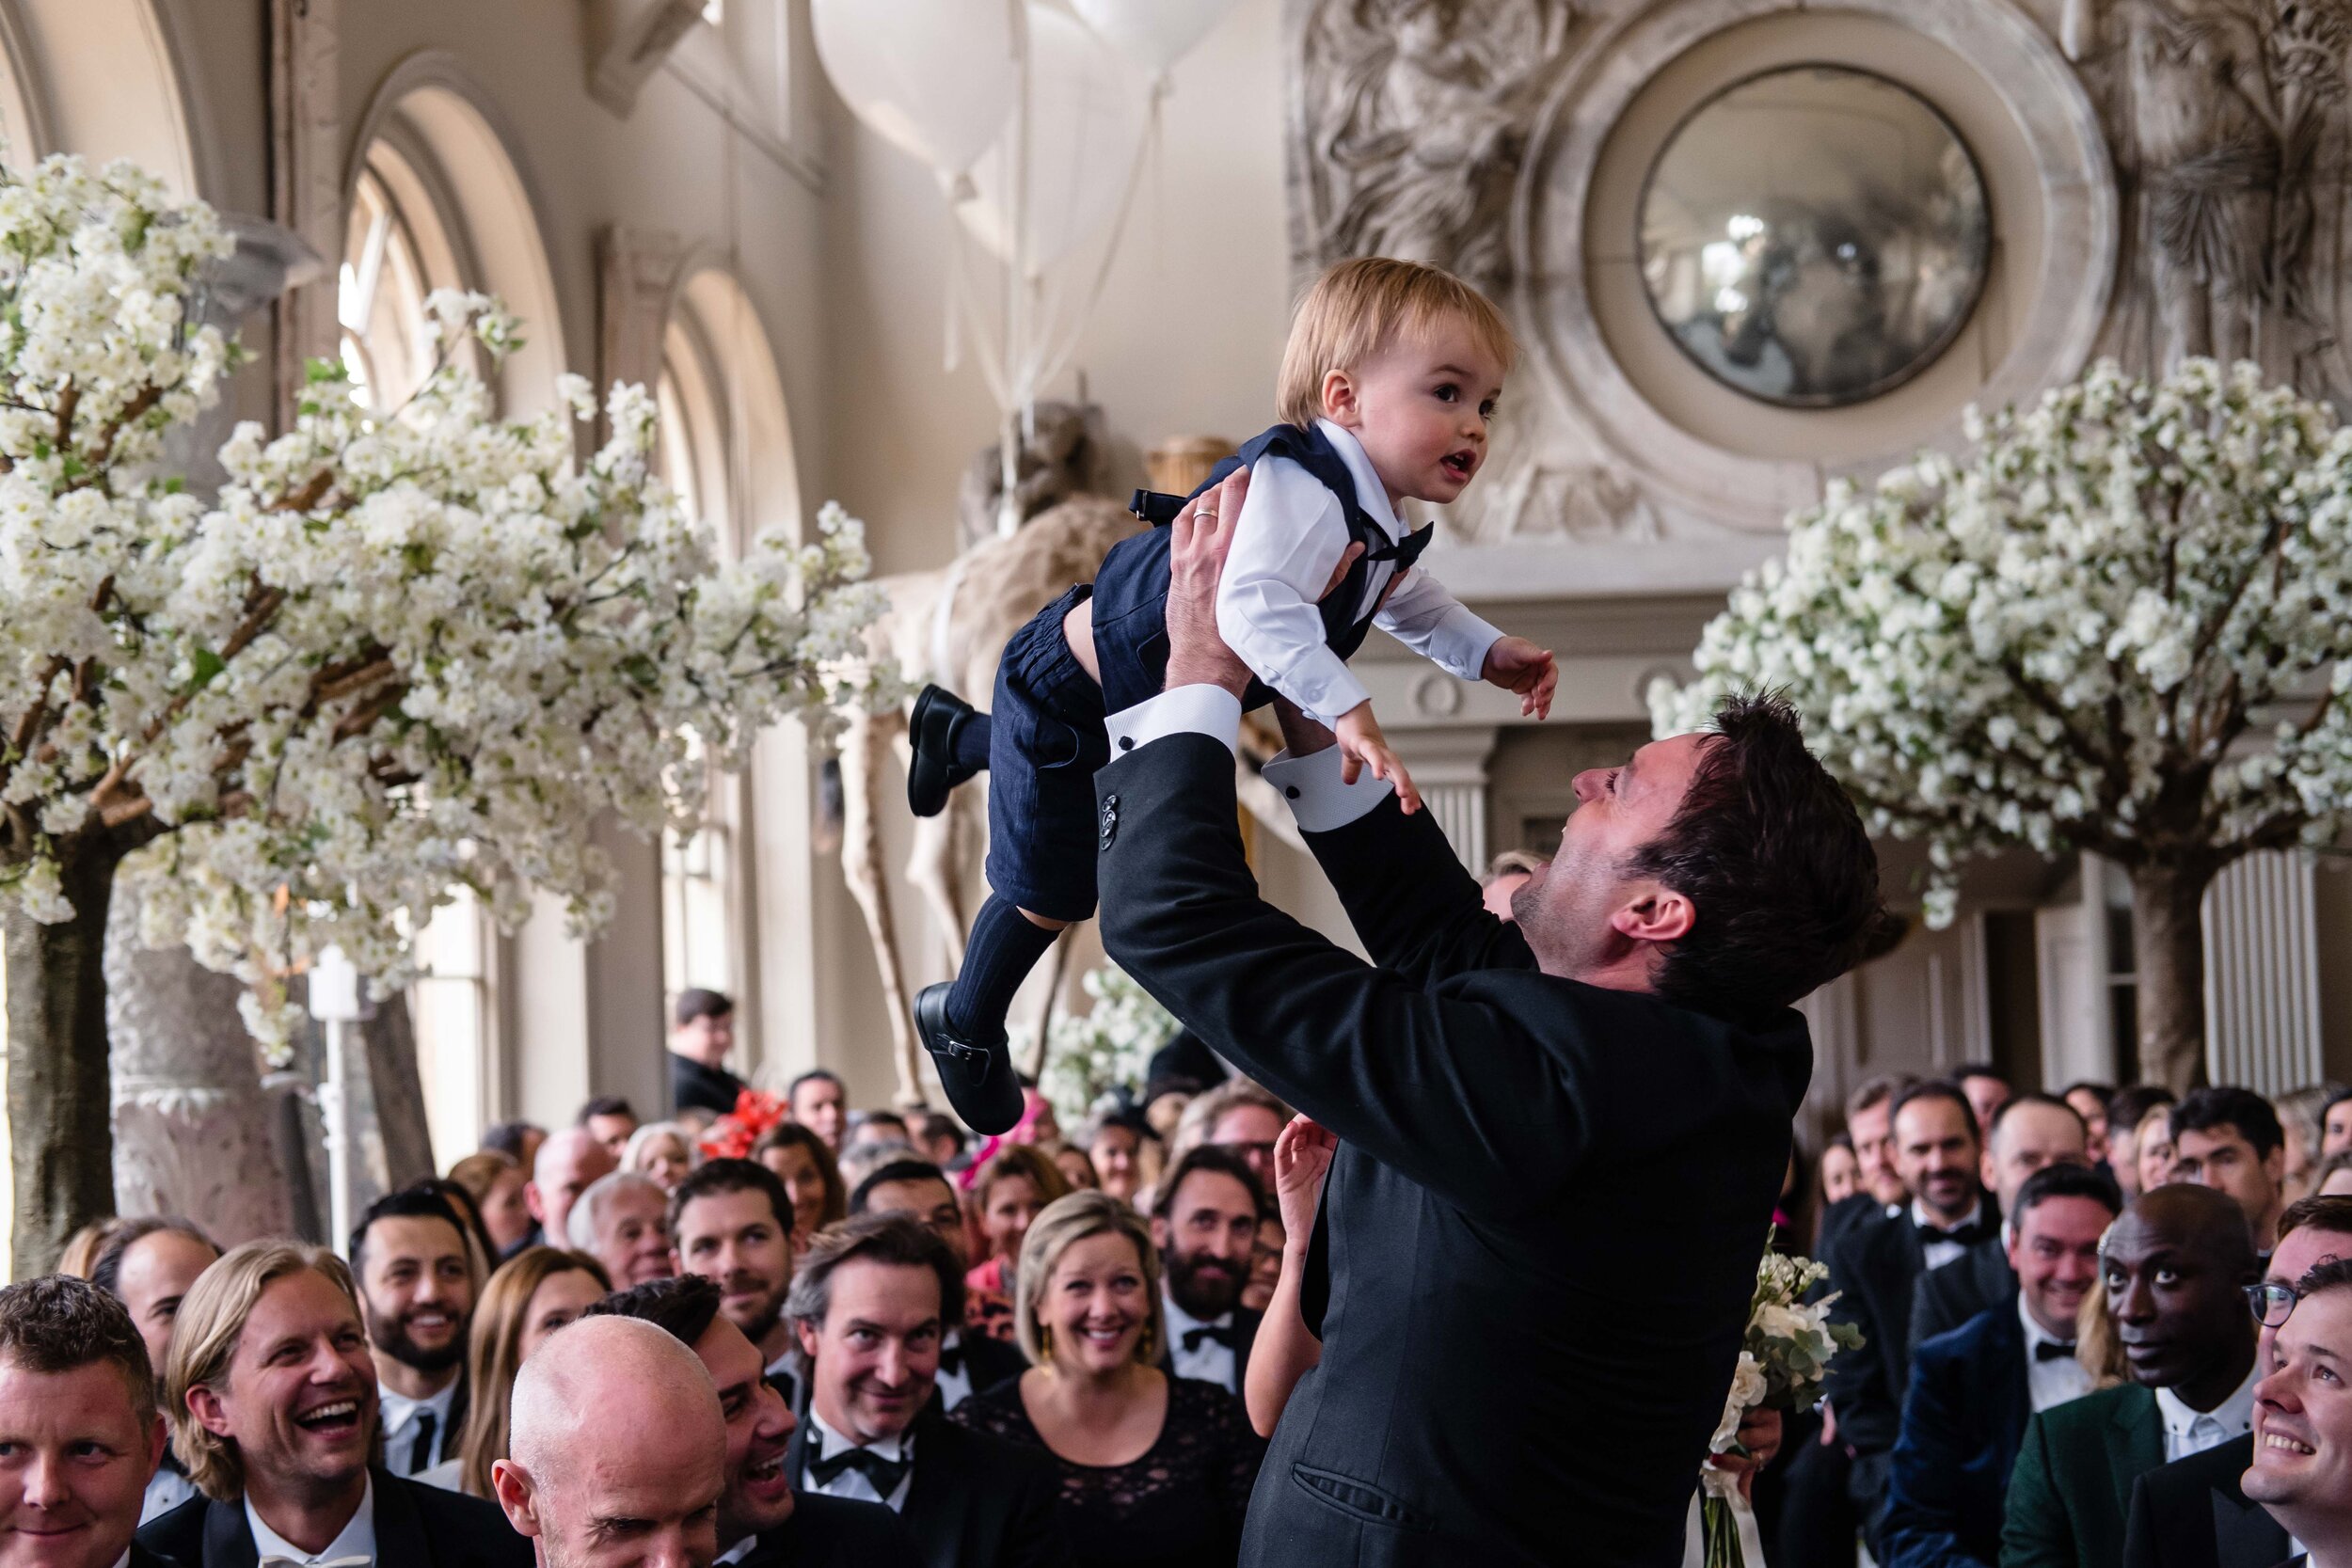 wedding guest throwing a little boy up into the air with white floral arrangements